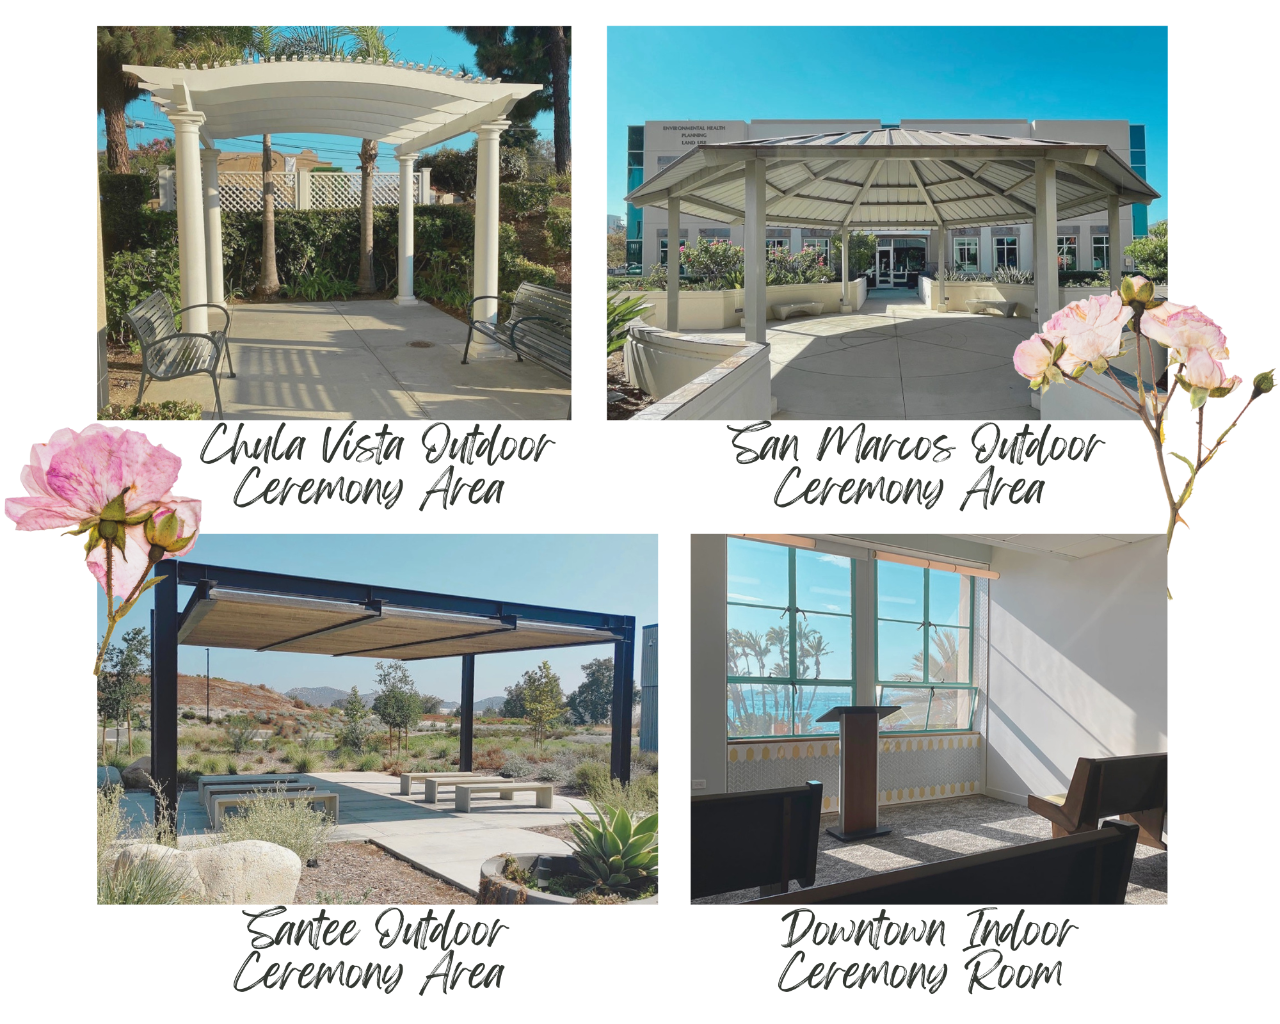 Image of different indoor/outdoor ceremony areas at various offices